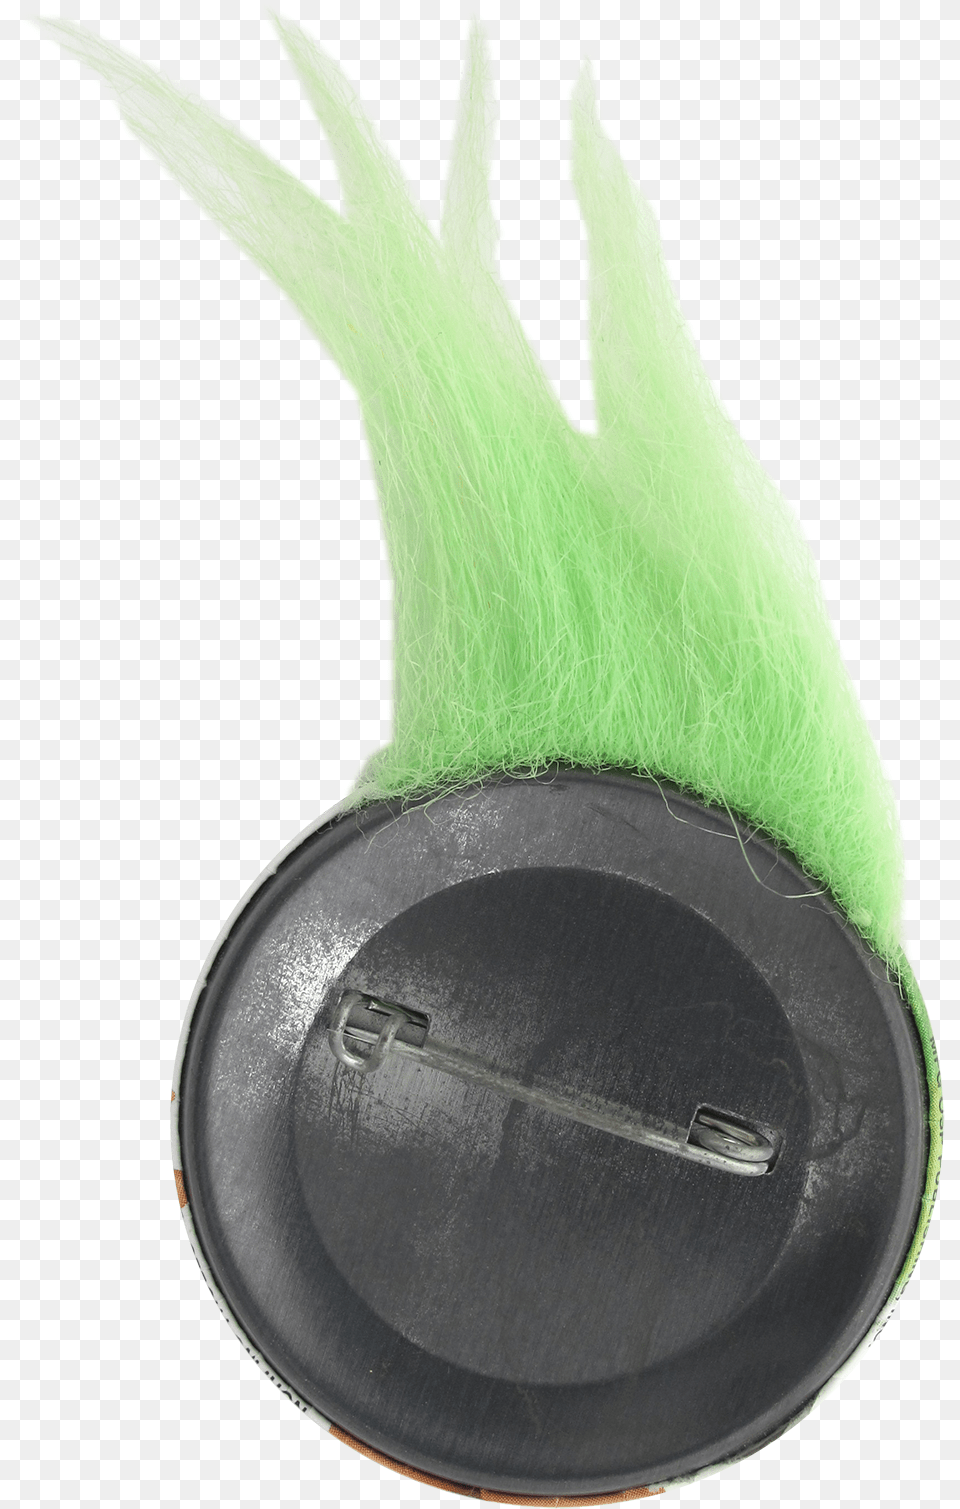 Troll Doll Green Button Back Innovative Button Museum Grass, Electronics, Camera Lens, Lens Cap Png Image